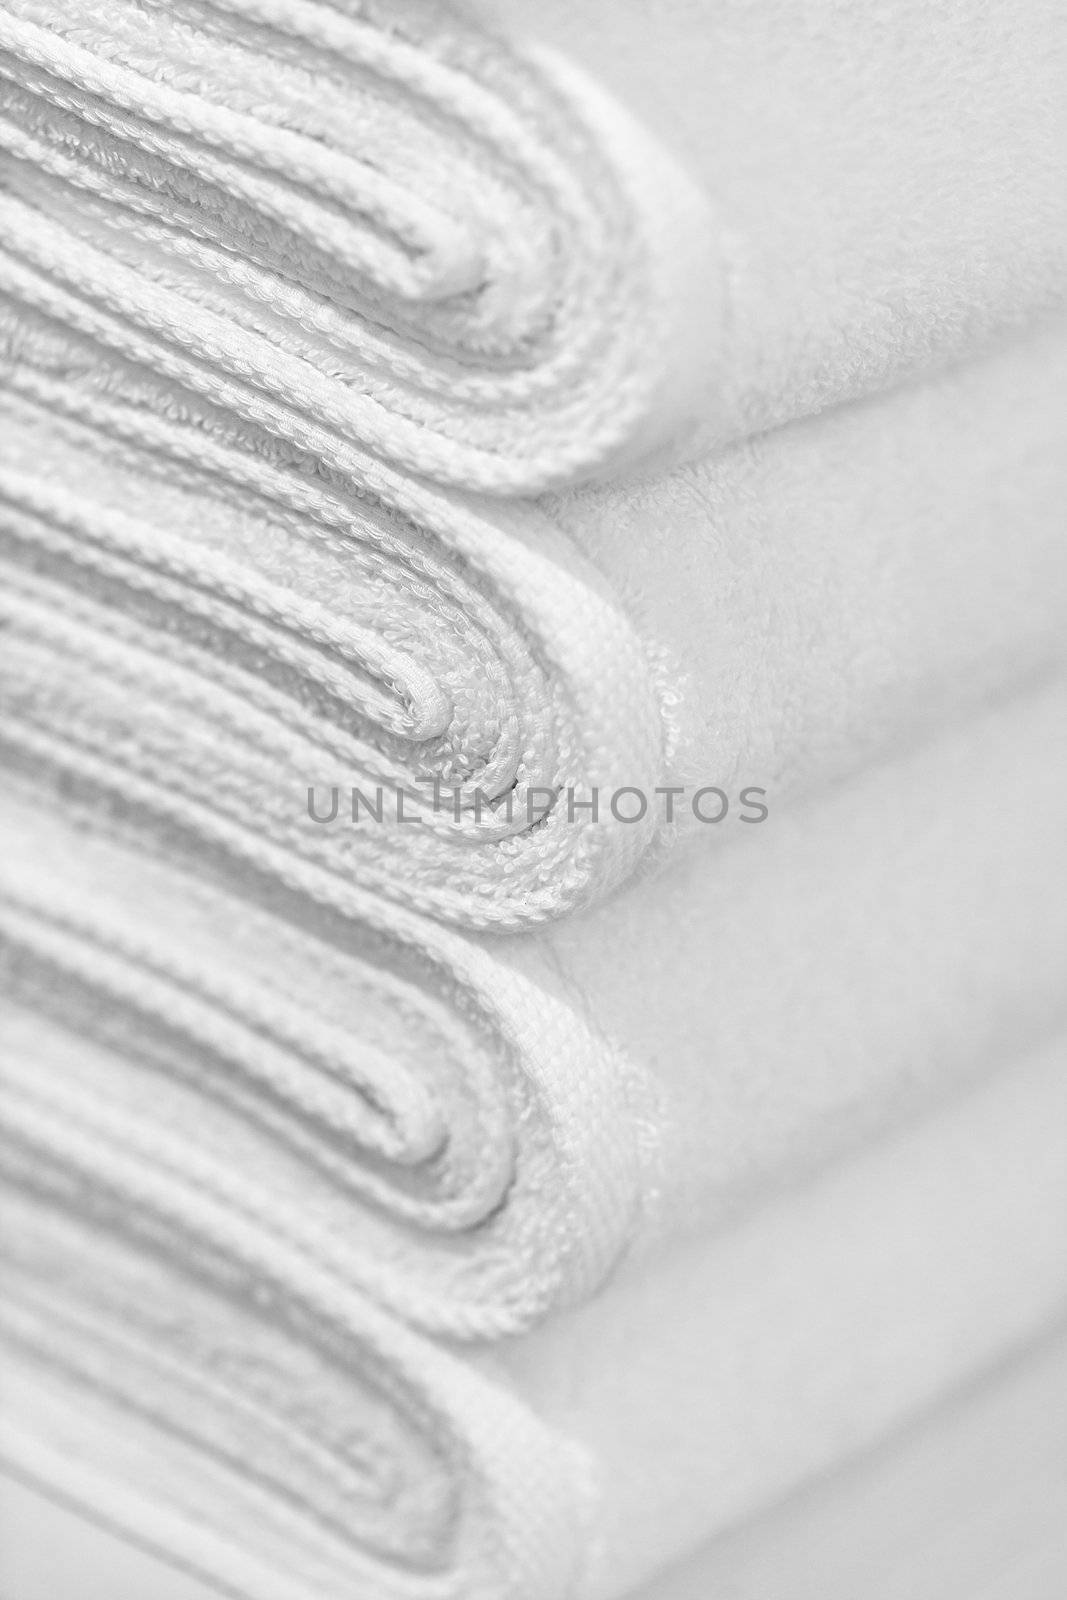 A stack of new white towels close-up - the background